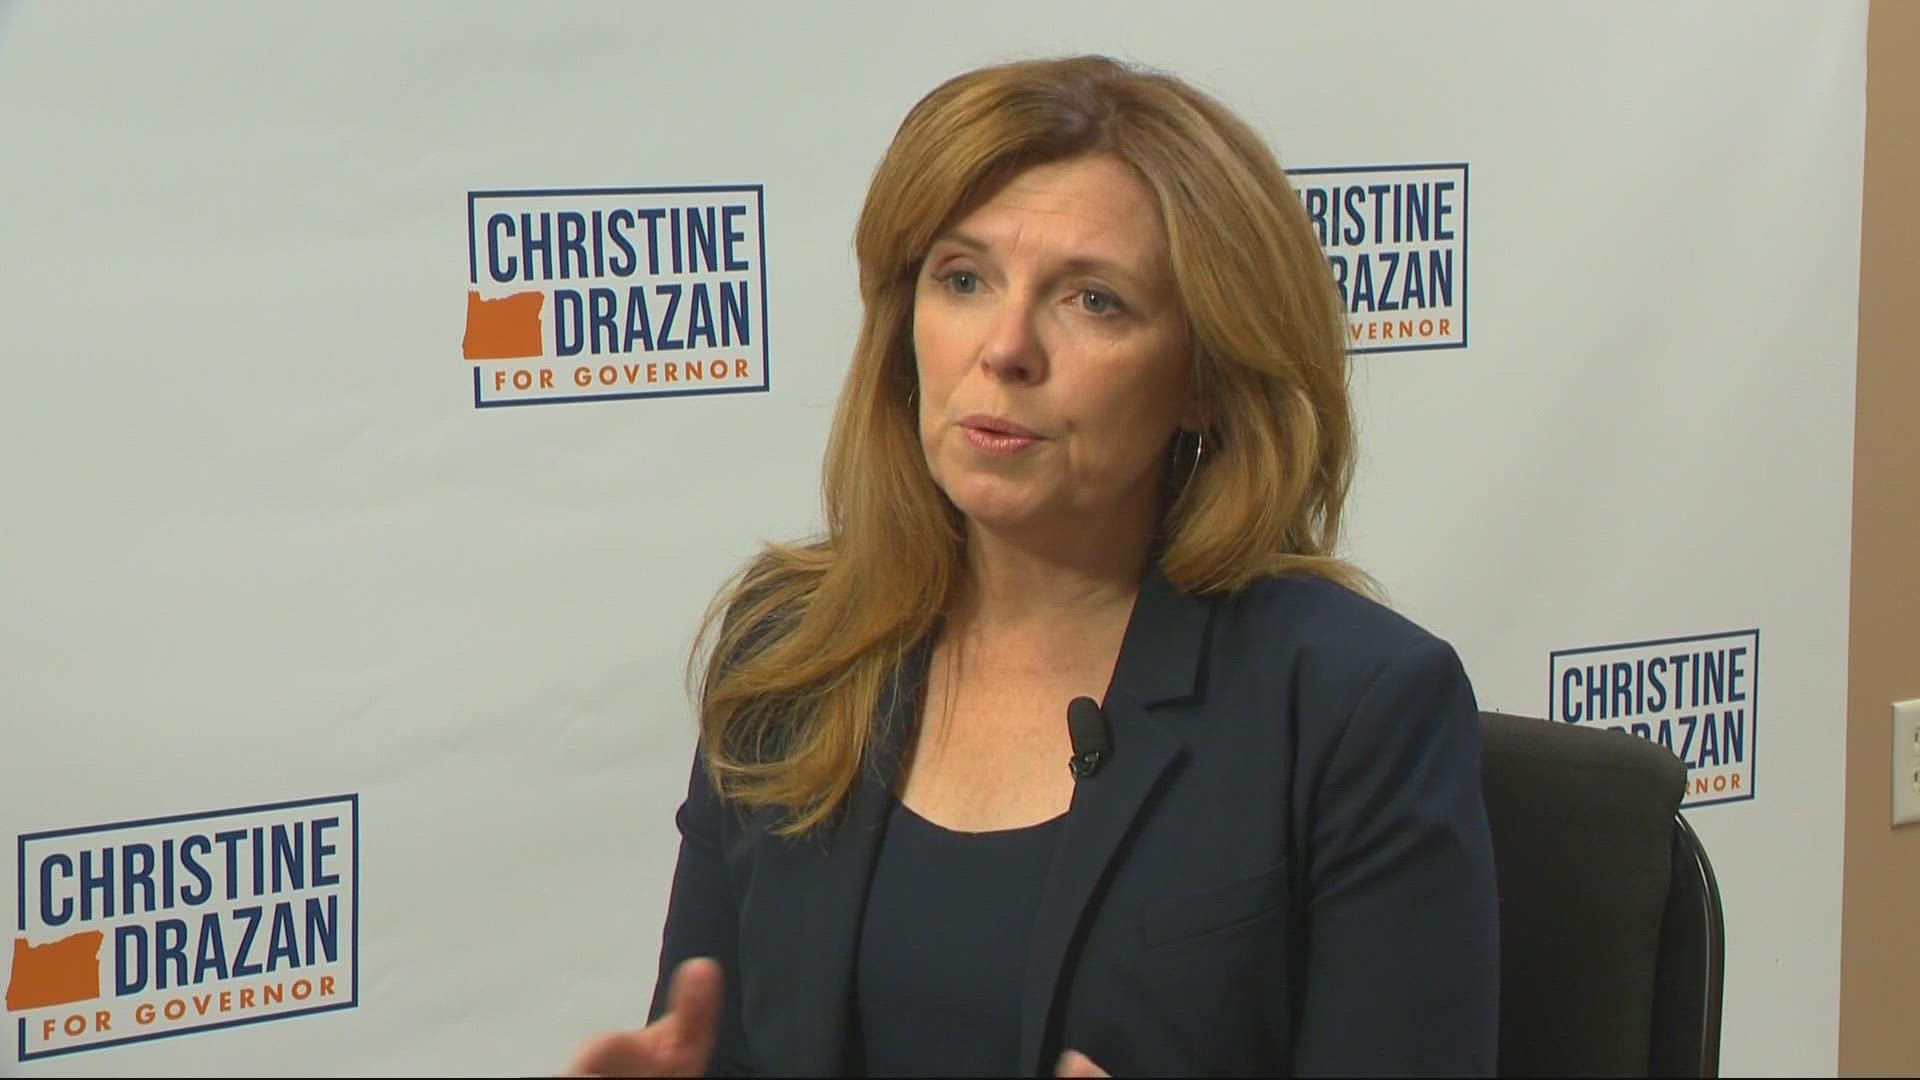 One of the biggest issues in the upcoming election for Oregon governor is homelessness. Here's what Republican candidate Christine Drazan had to say.